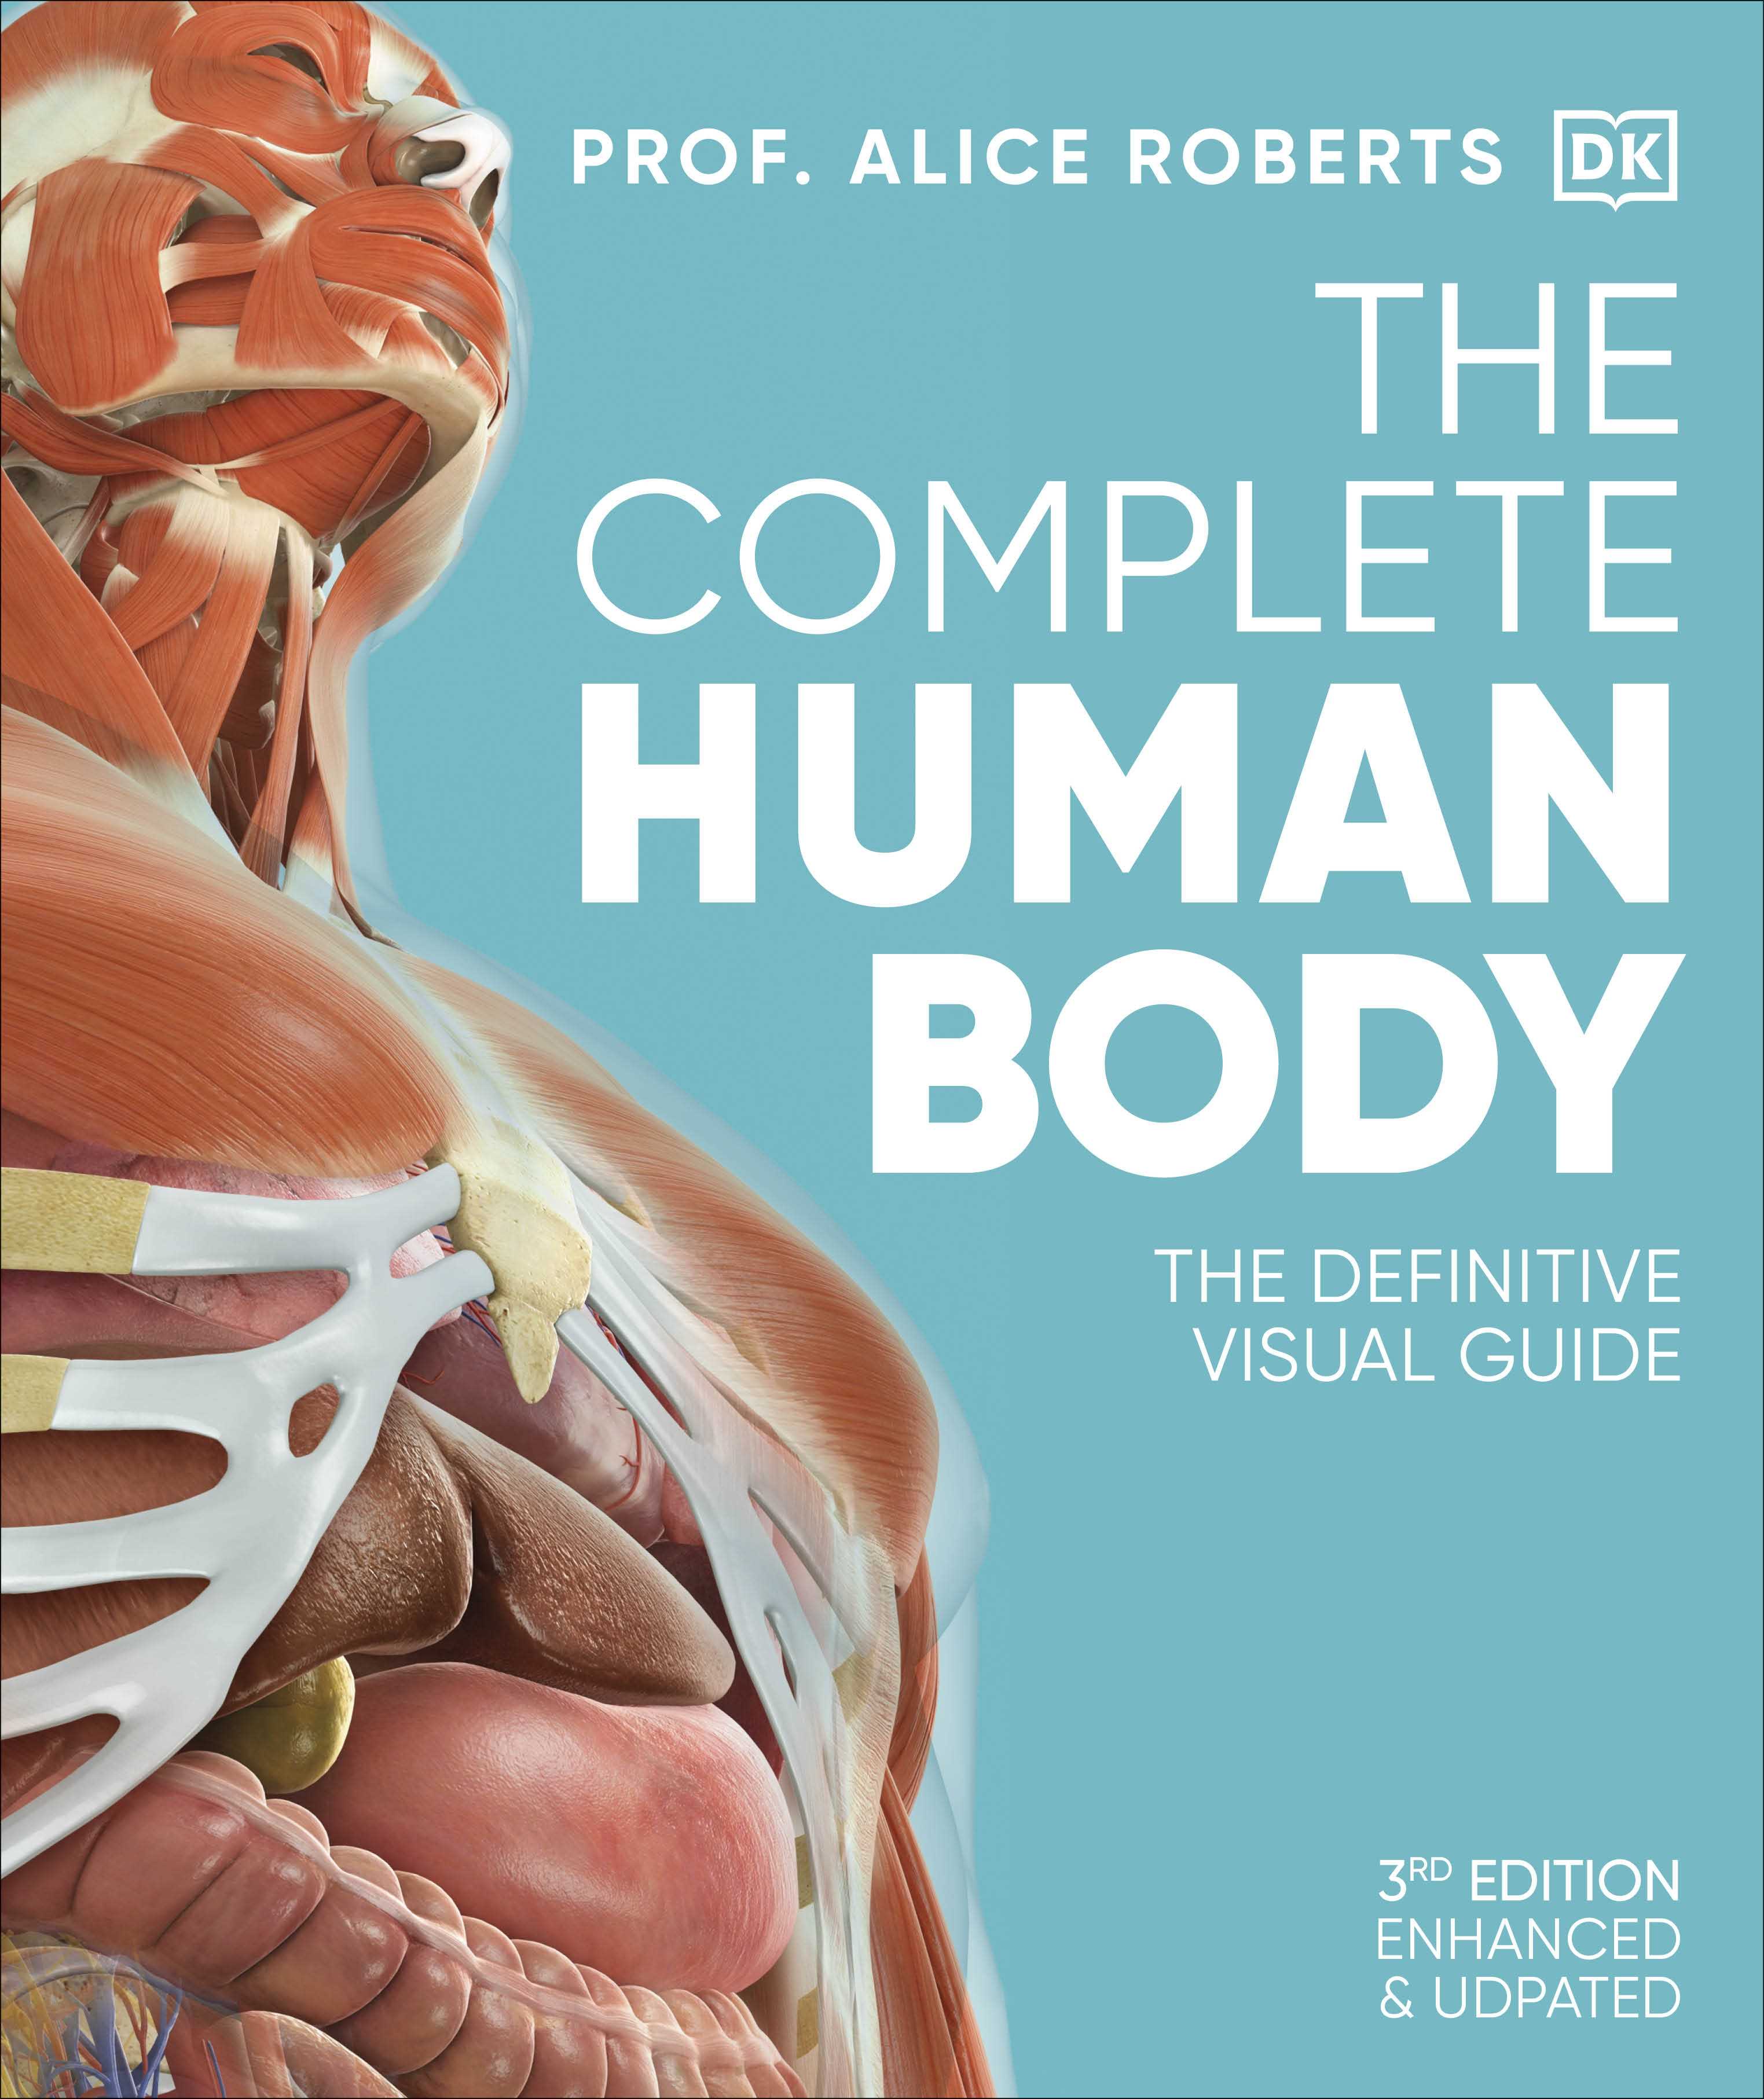 The Complete Human Body (3rd Edition)